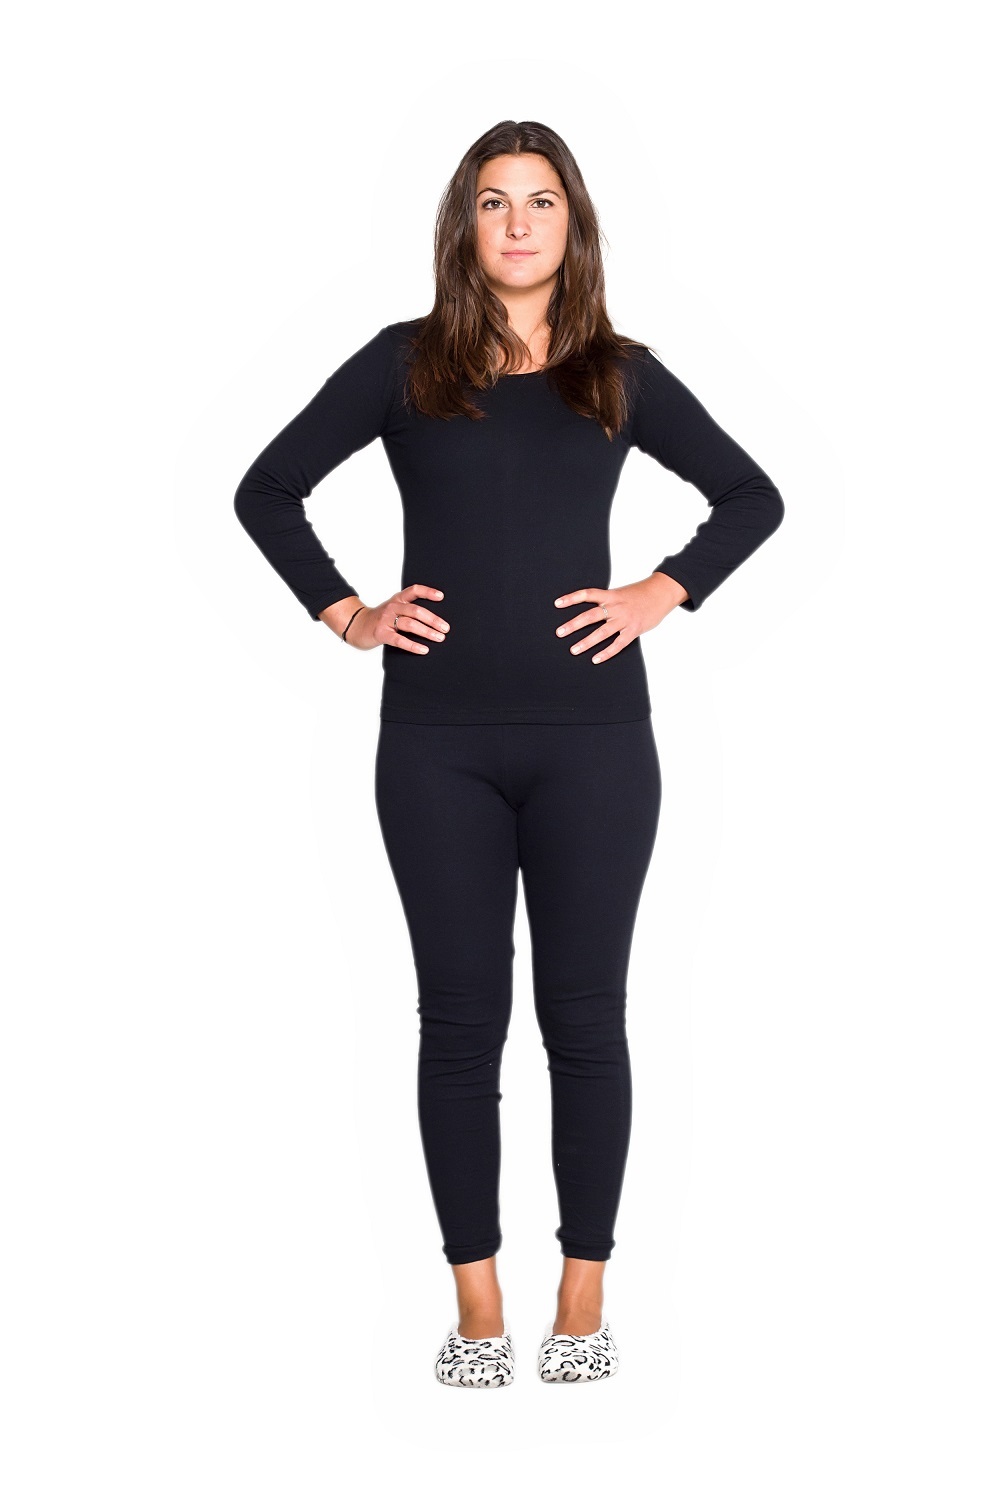 Buy Tog 24 Snowdon Womens Thermal Leggings from the Next UK online shop